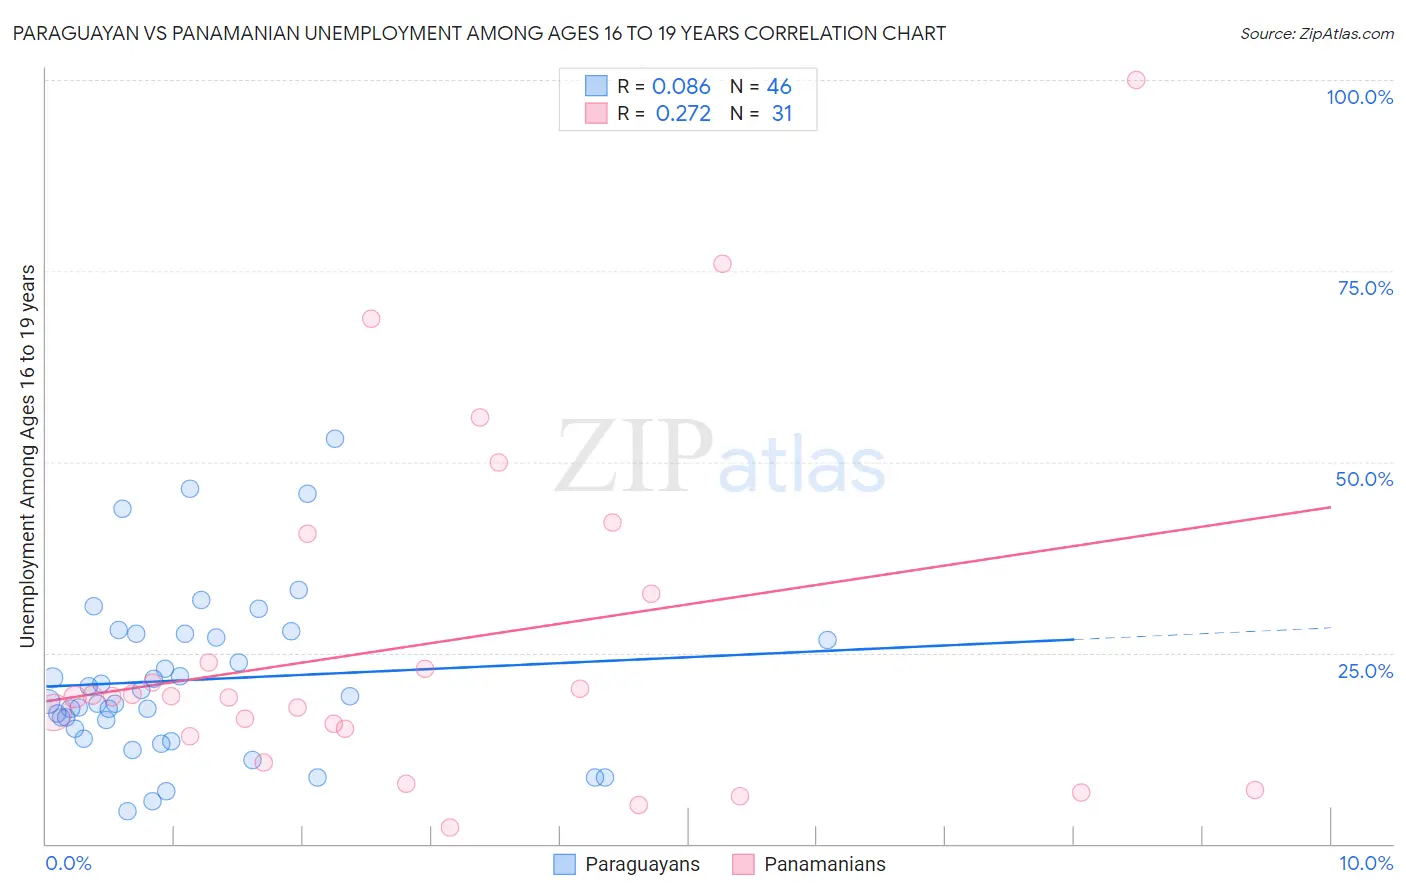 Paraguayan vs Panamanian Unemployment Among Ages 16 to 19 years